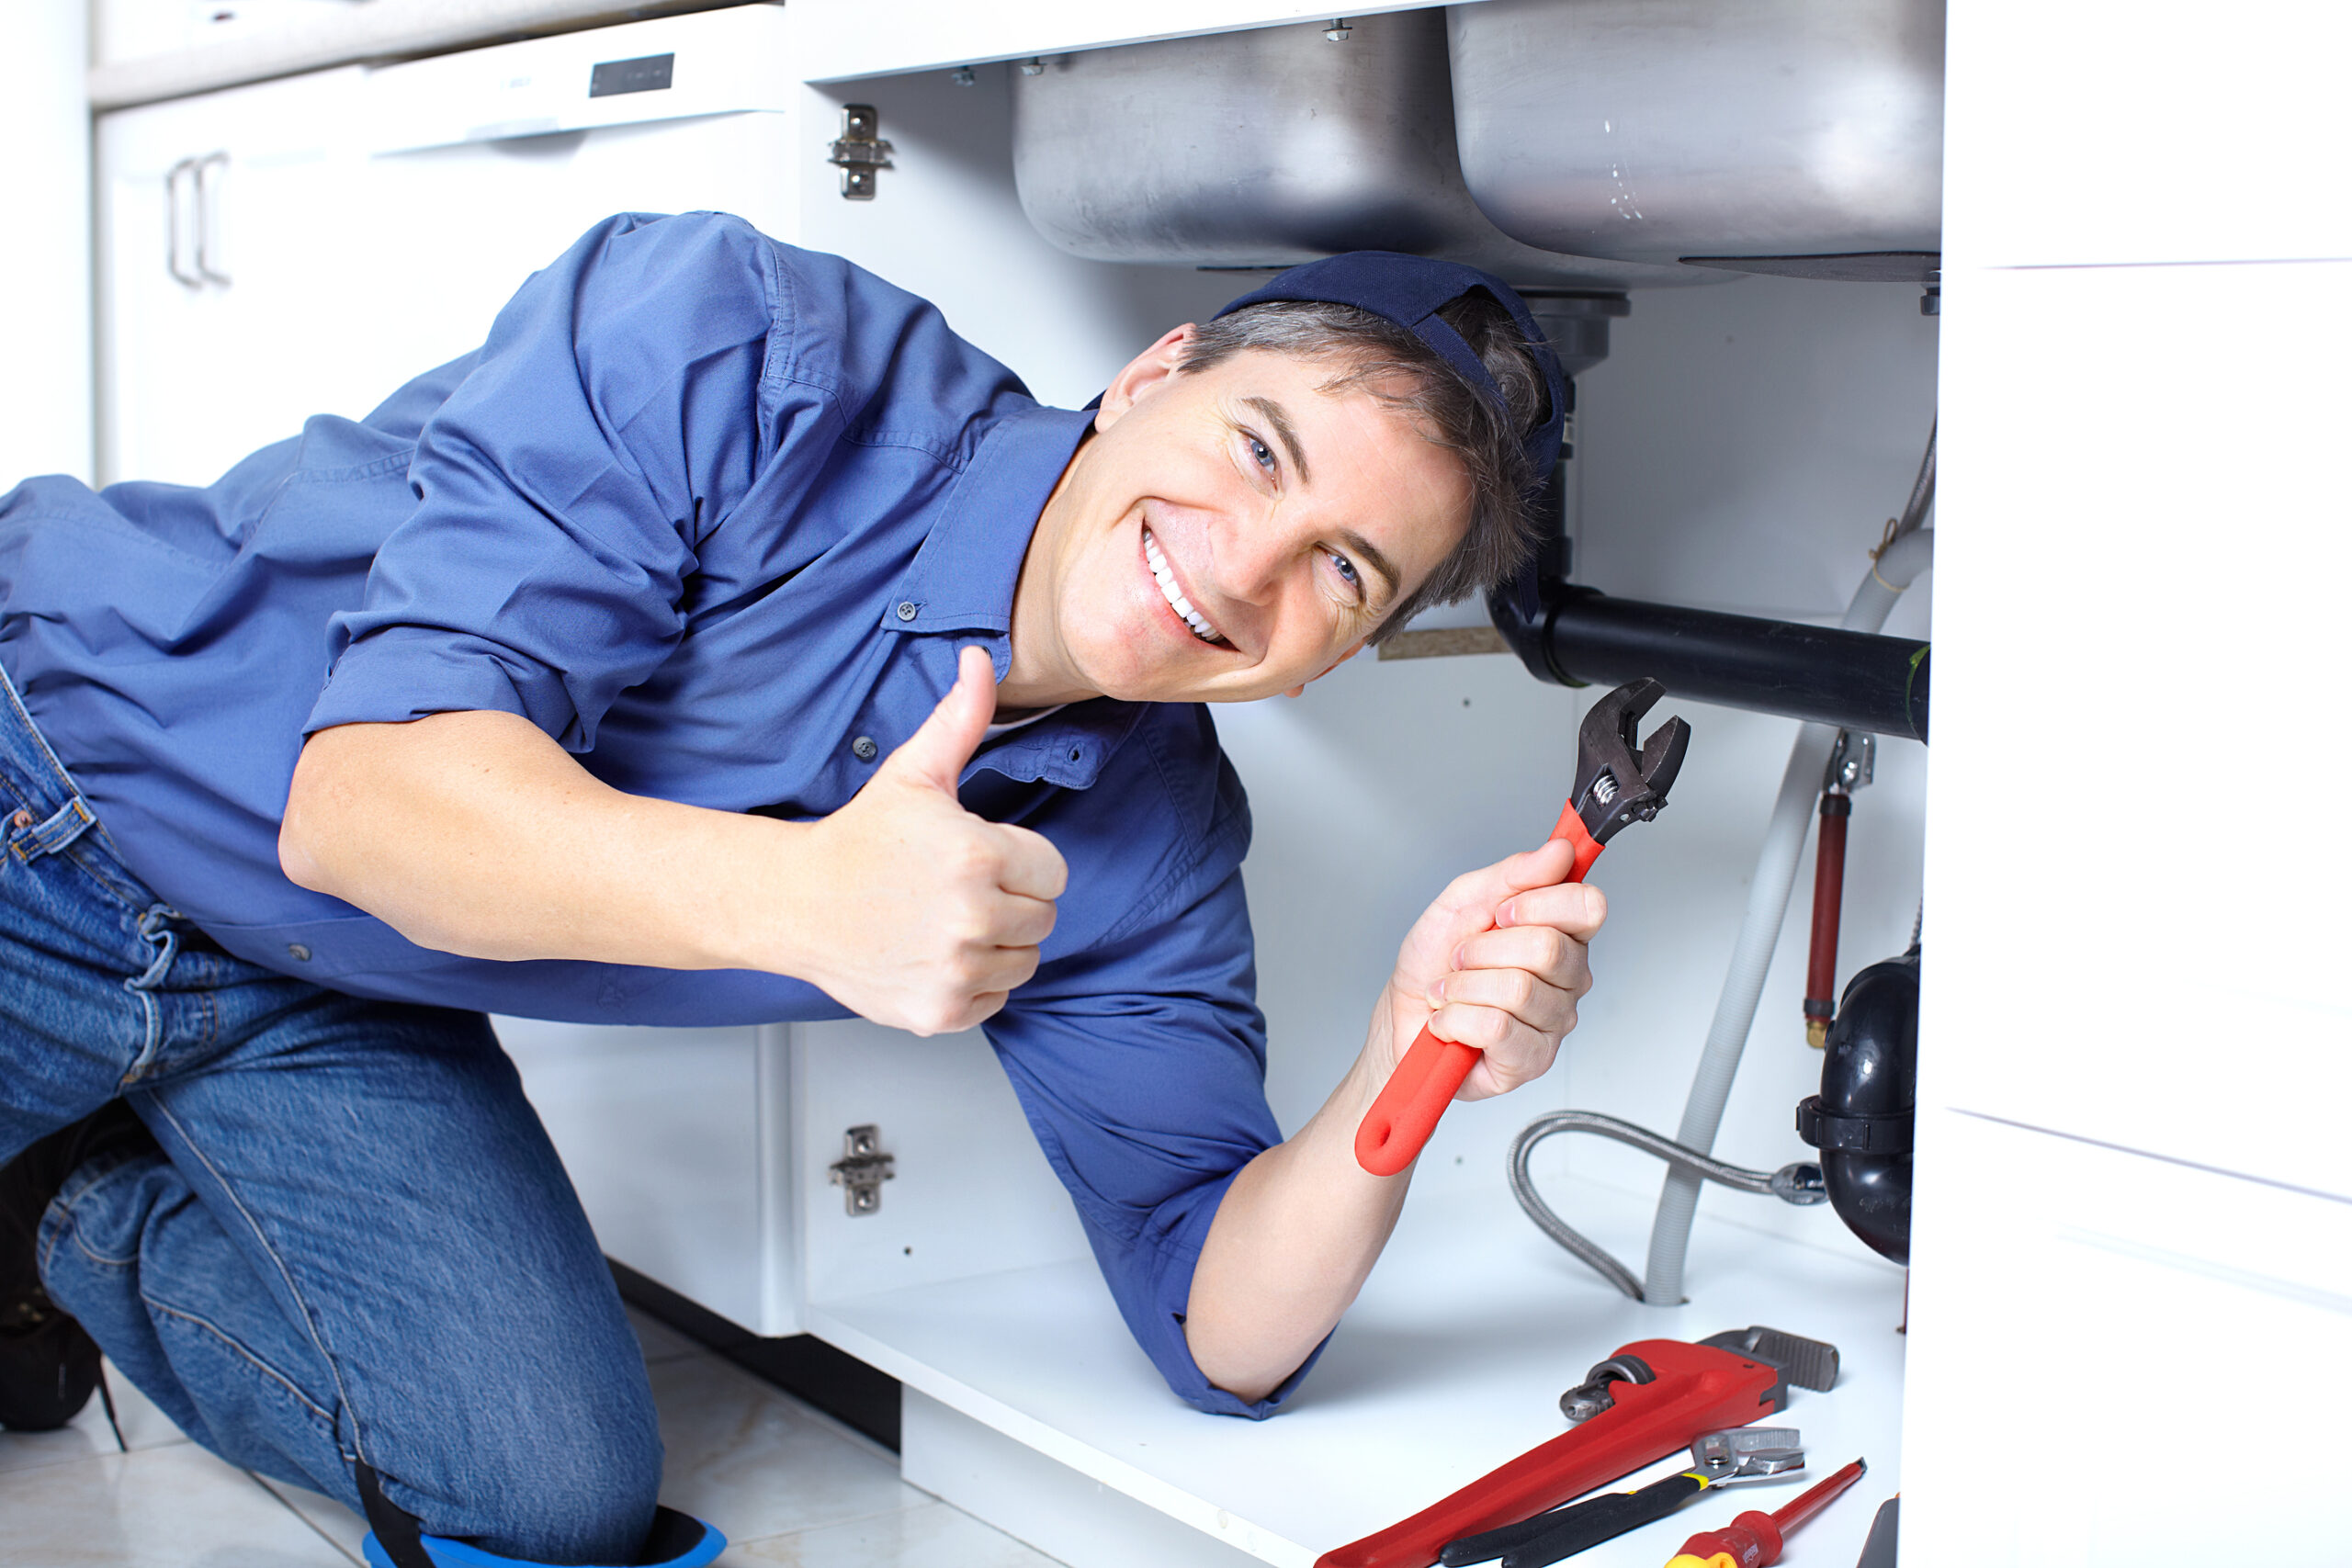 7 Tips on How to Find a Plumber in Your Area